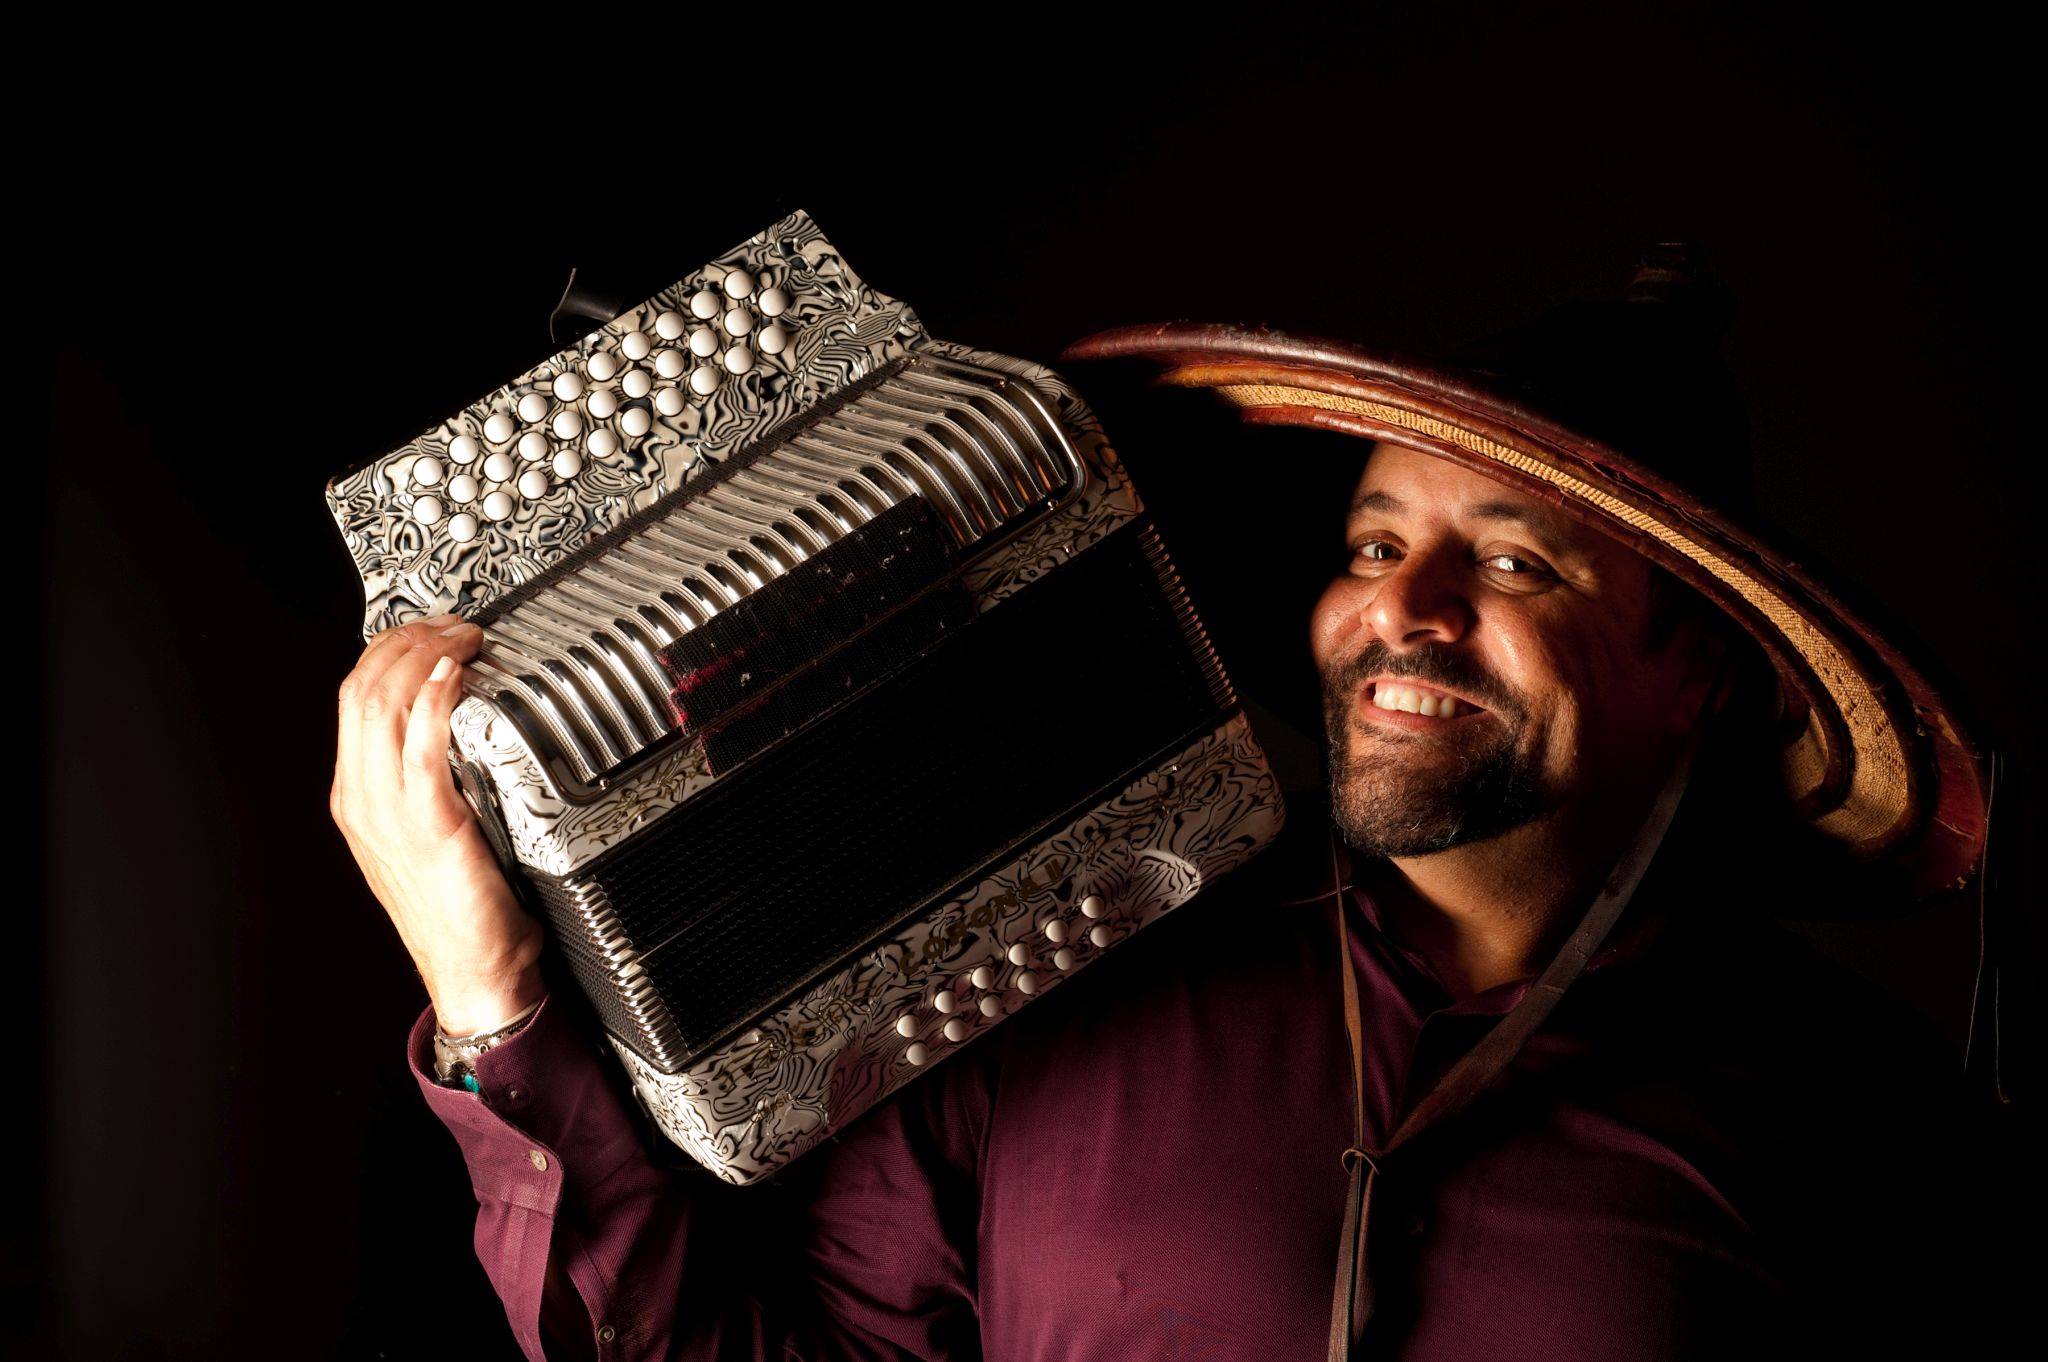 The master of Zydeco music